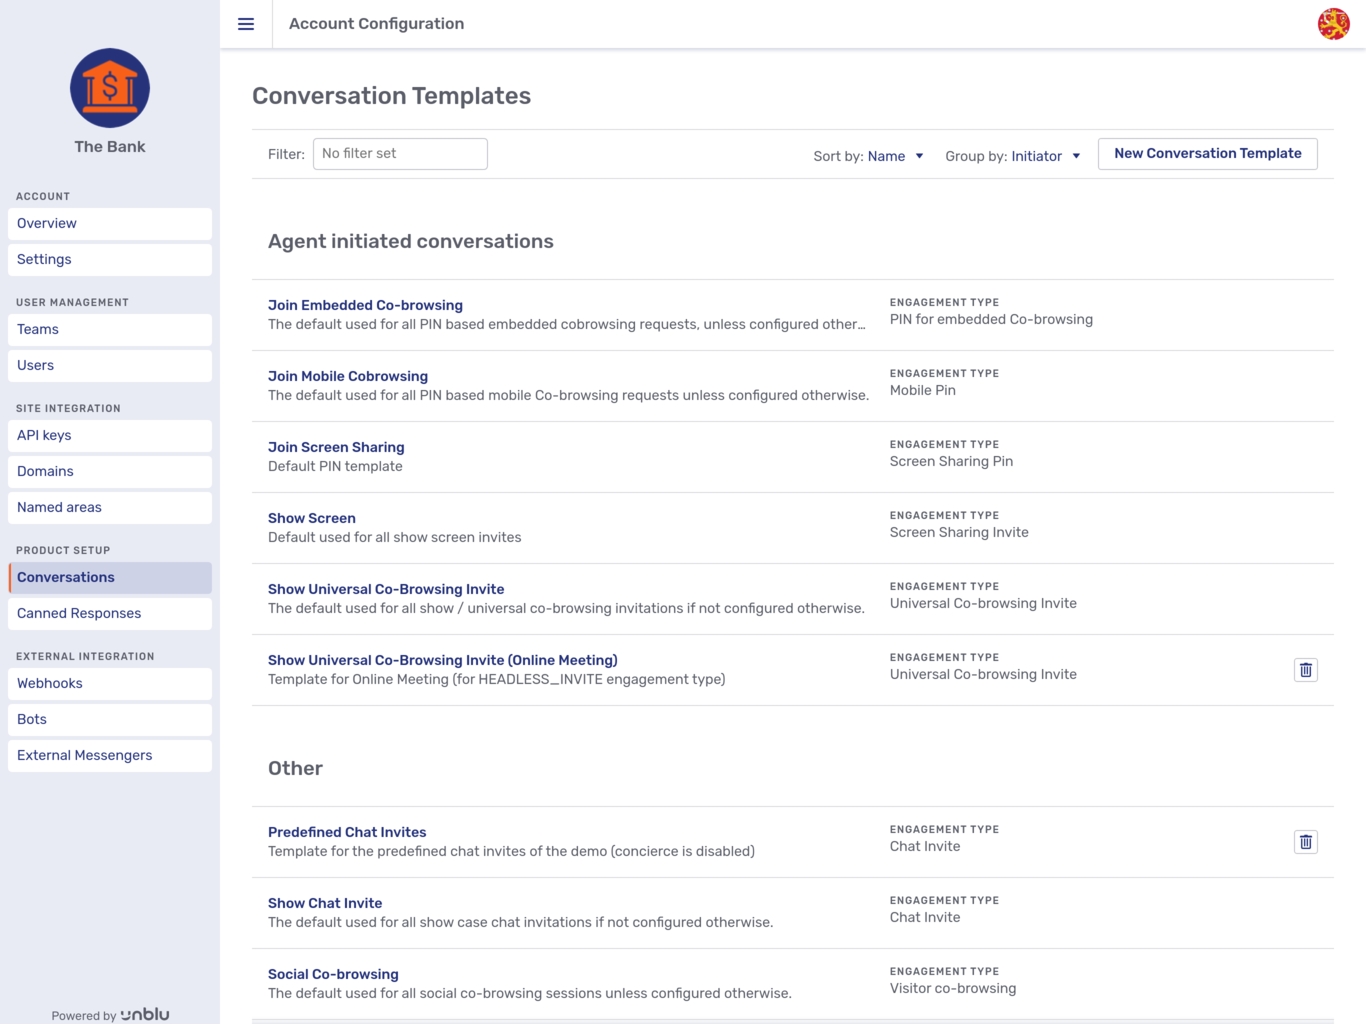 Conversations overview: overview of conversation templates